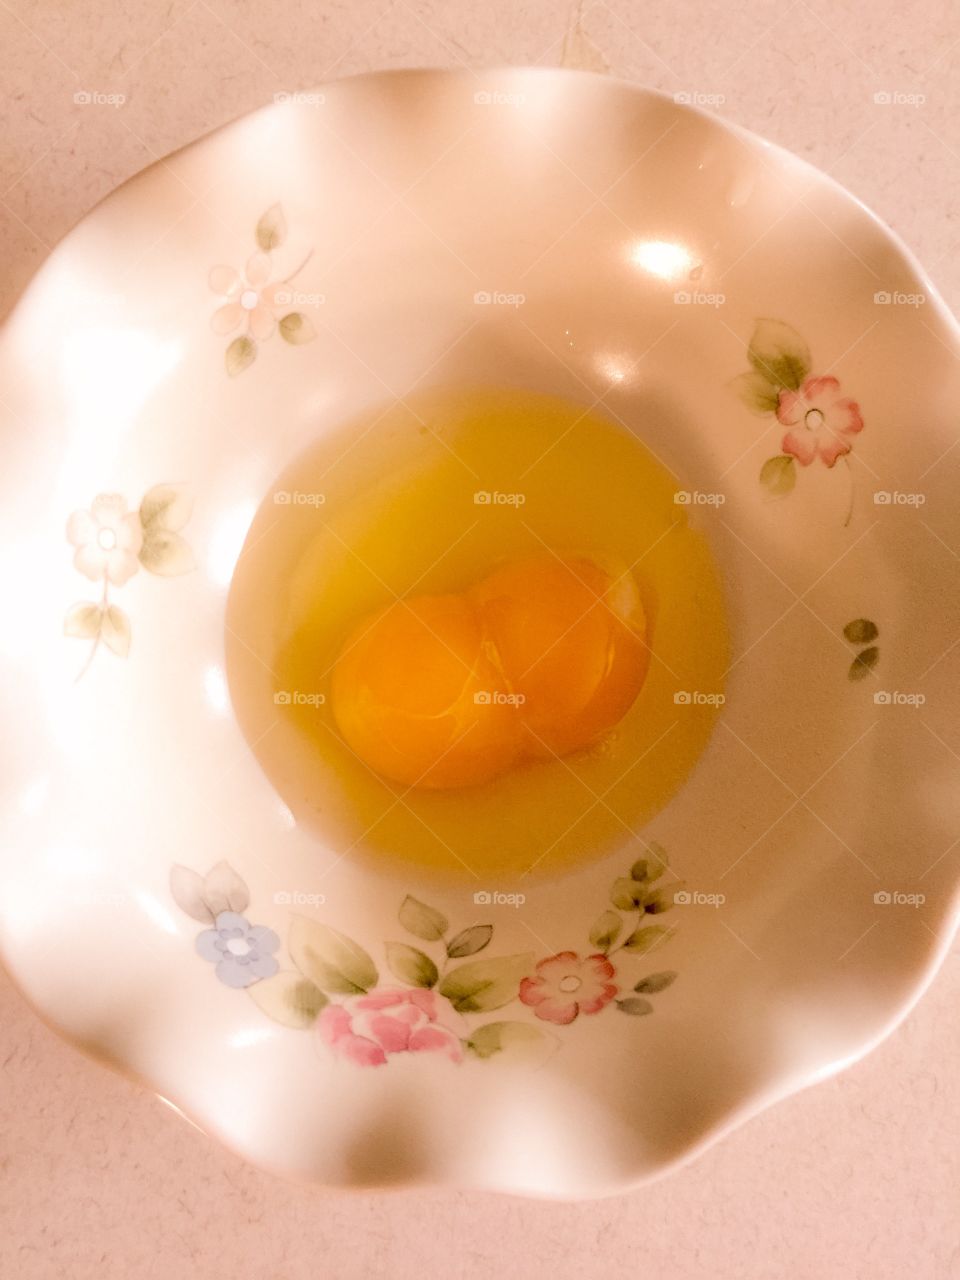 Naturally Perfect Imperfections.....
One egg, two yolks!
